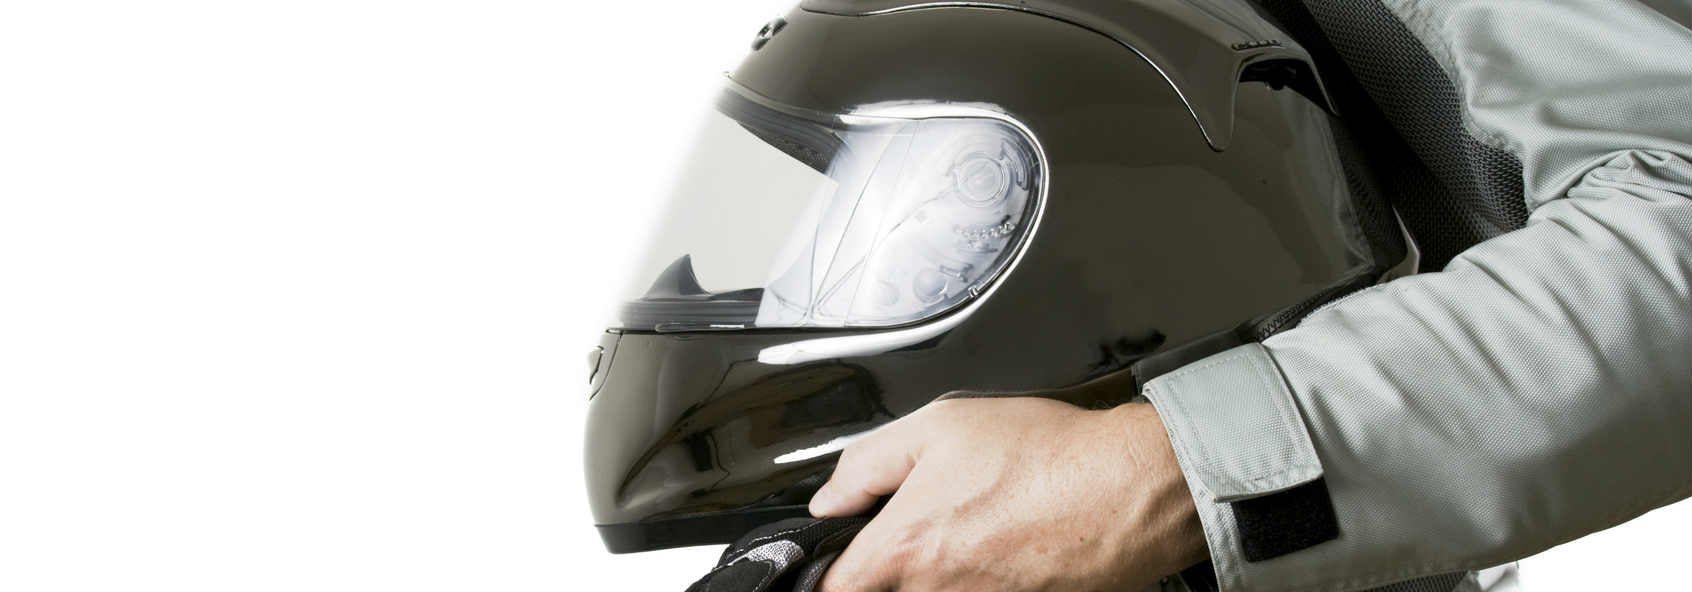 Motorcycle Helmets The Legal Standards